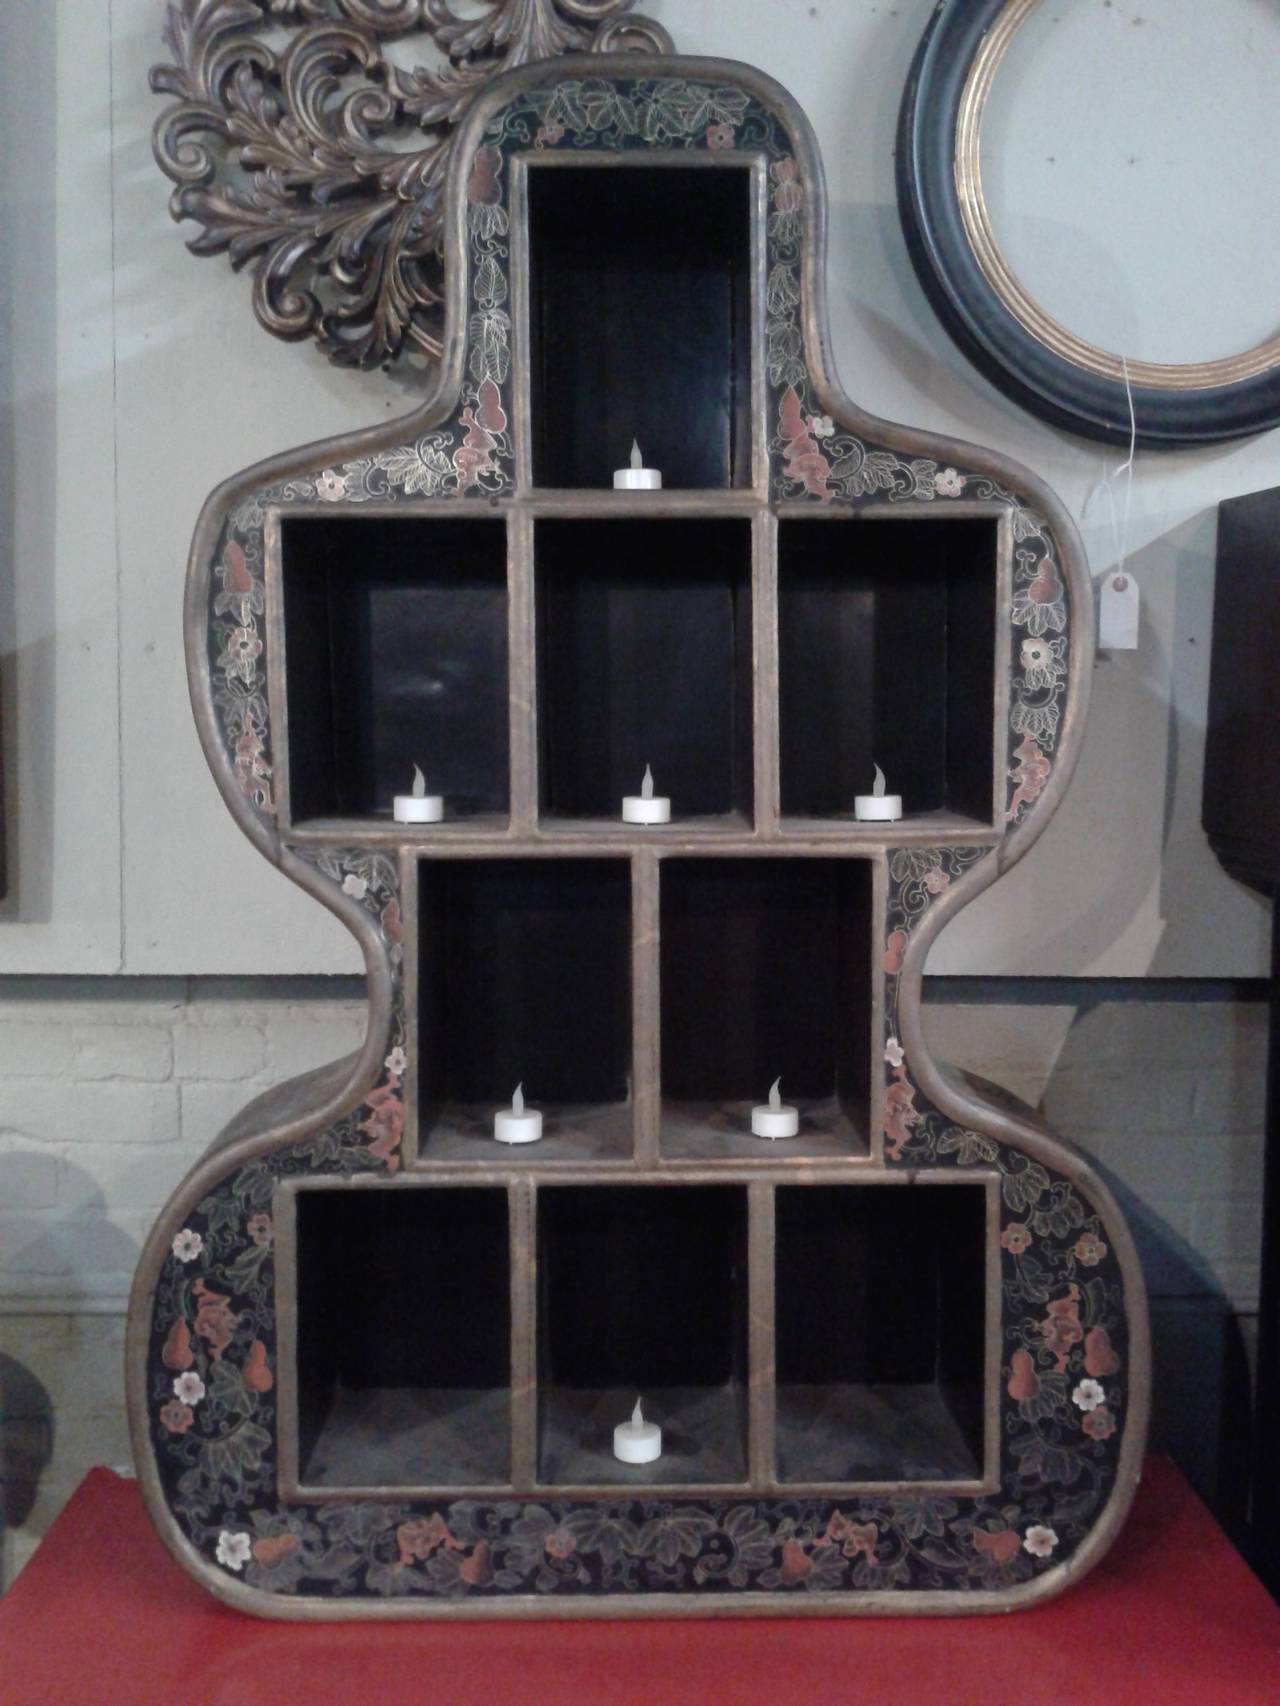 9 Compartment Vintage shadow Box with Asian Motif in excellent condition. Flame less candles not included. Sits on a flat surface without additional support.